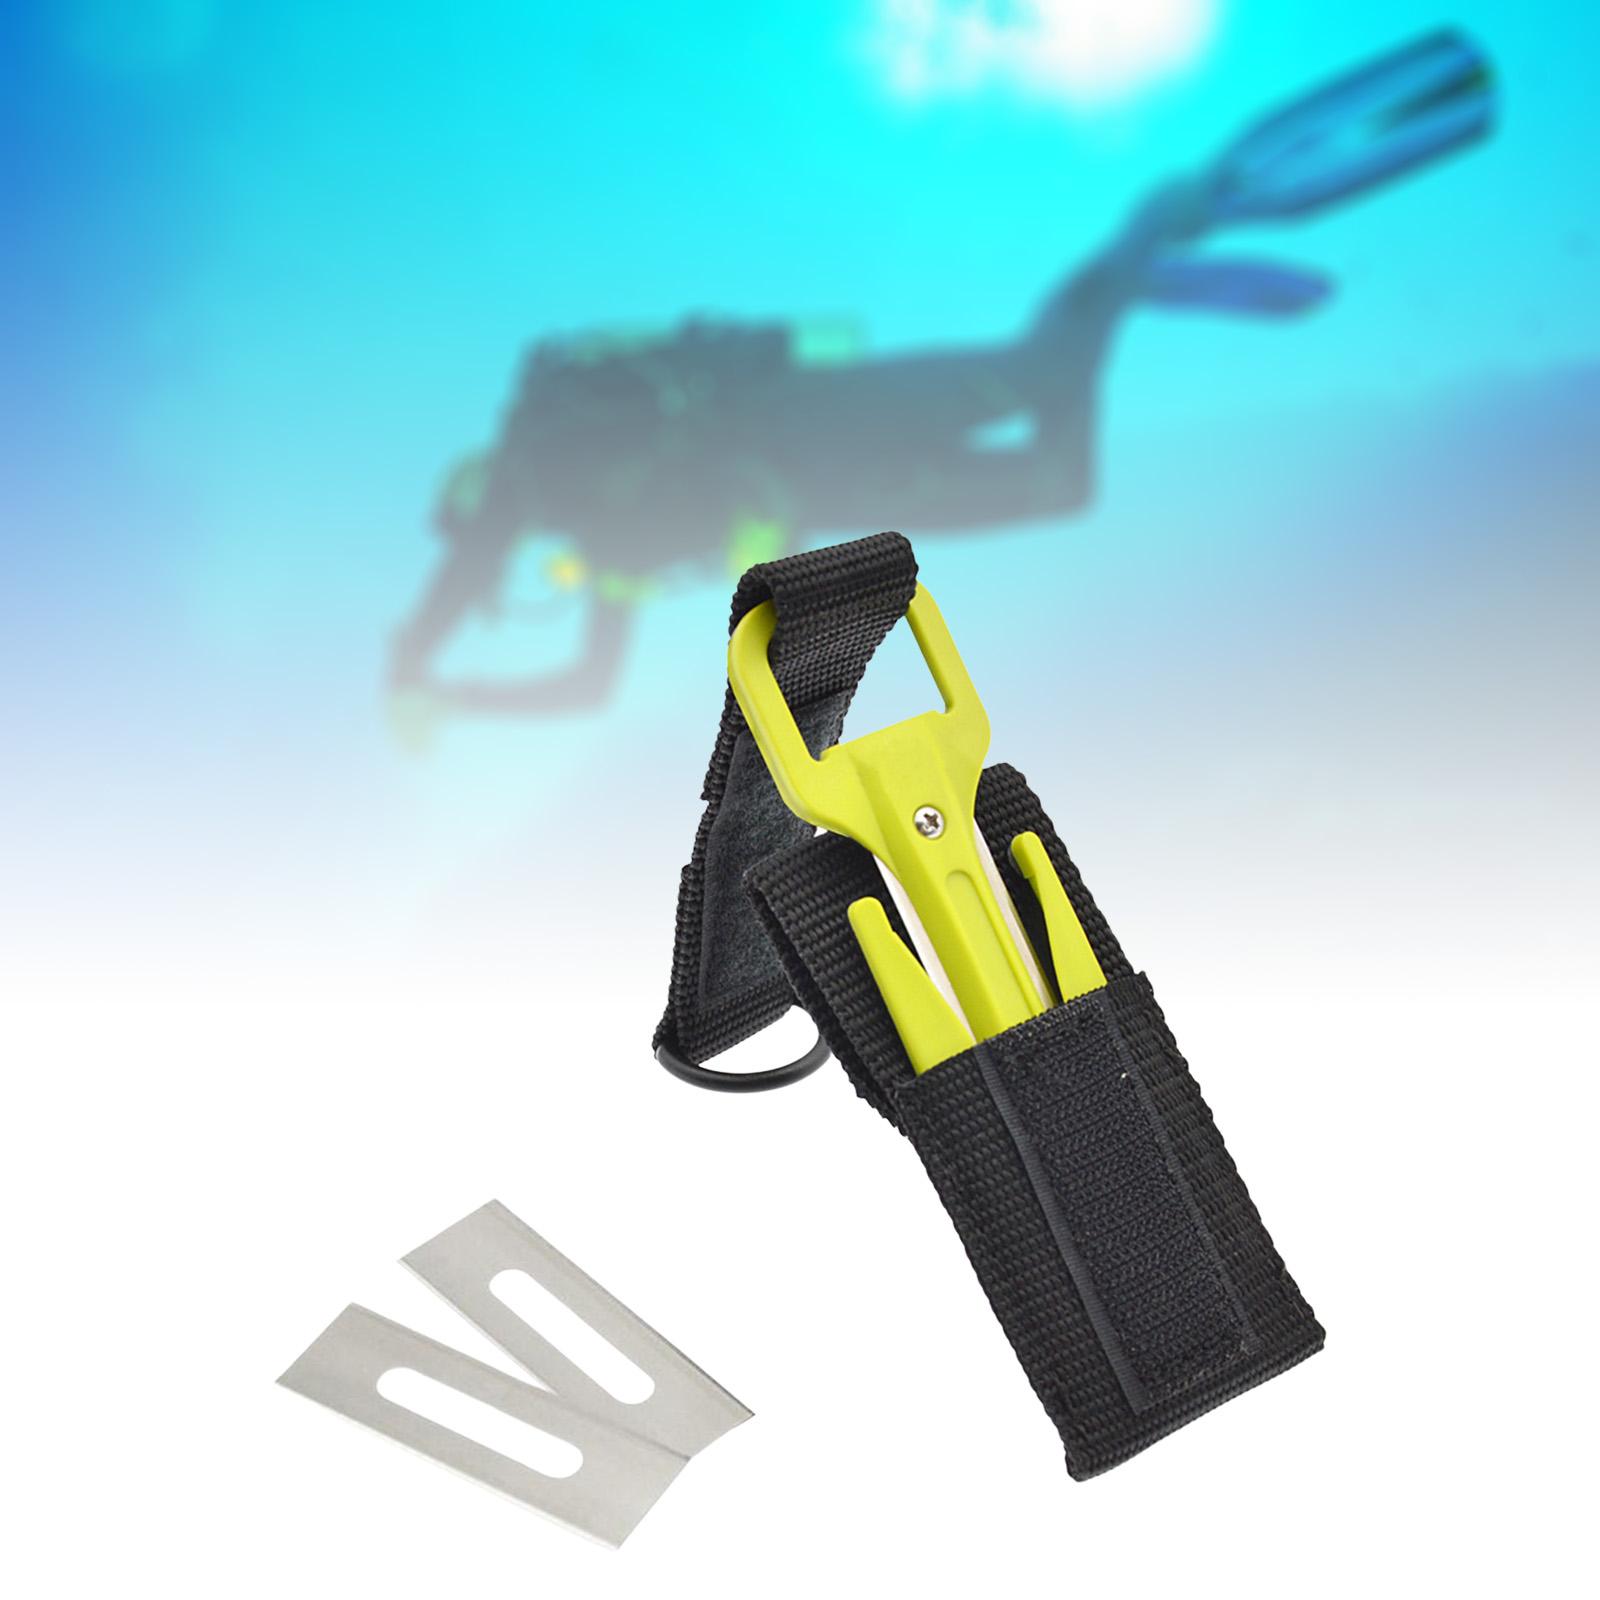 Scuba Dive Line Cutter with Webbing Snorkeling Knives for Underwater Diving